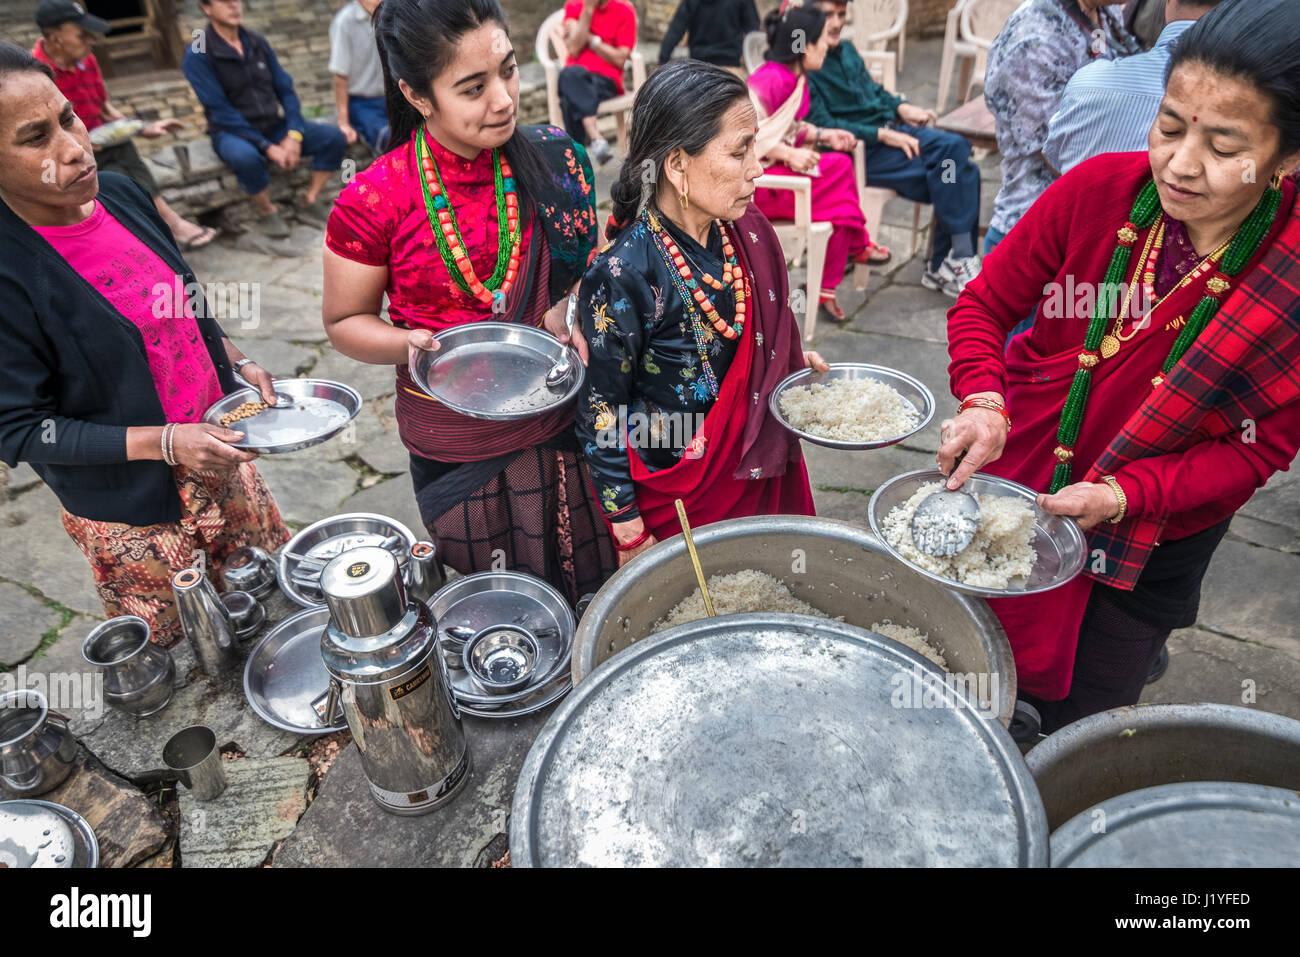 Women in traditional Gurung costumes having foods during a local celebration in Sidhane village, Kaski, Nepal. Stock Photo